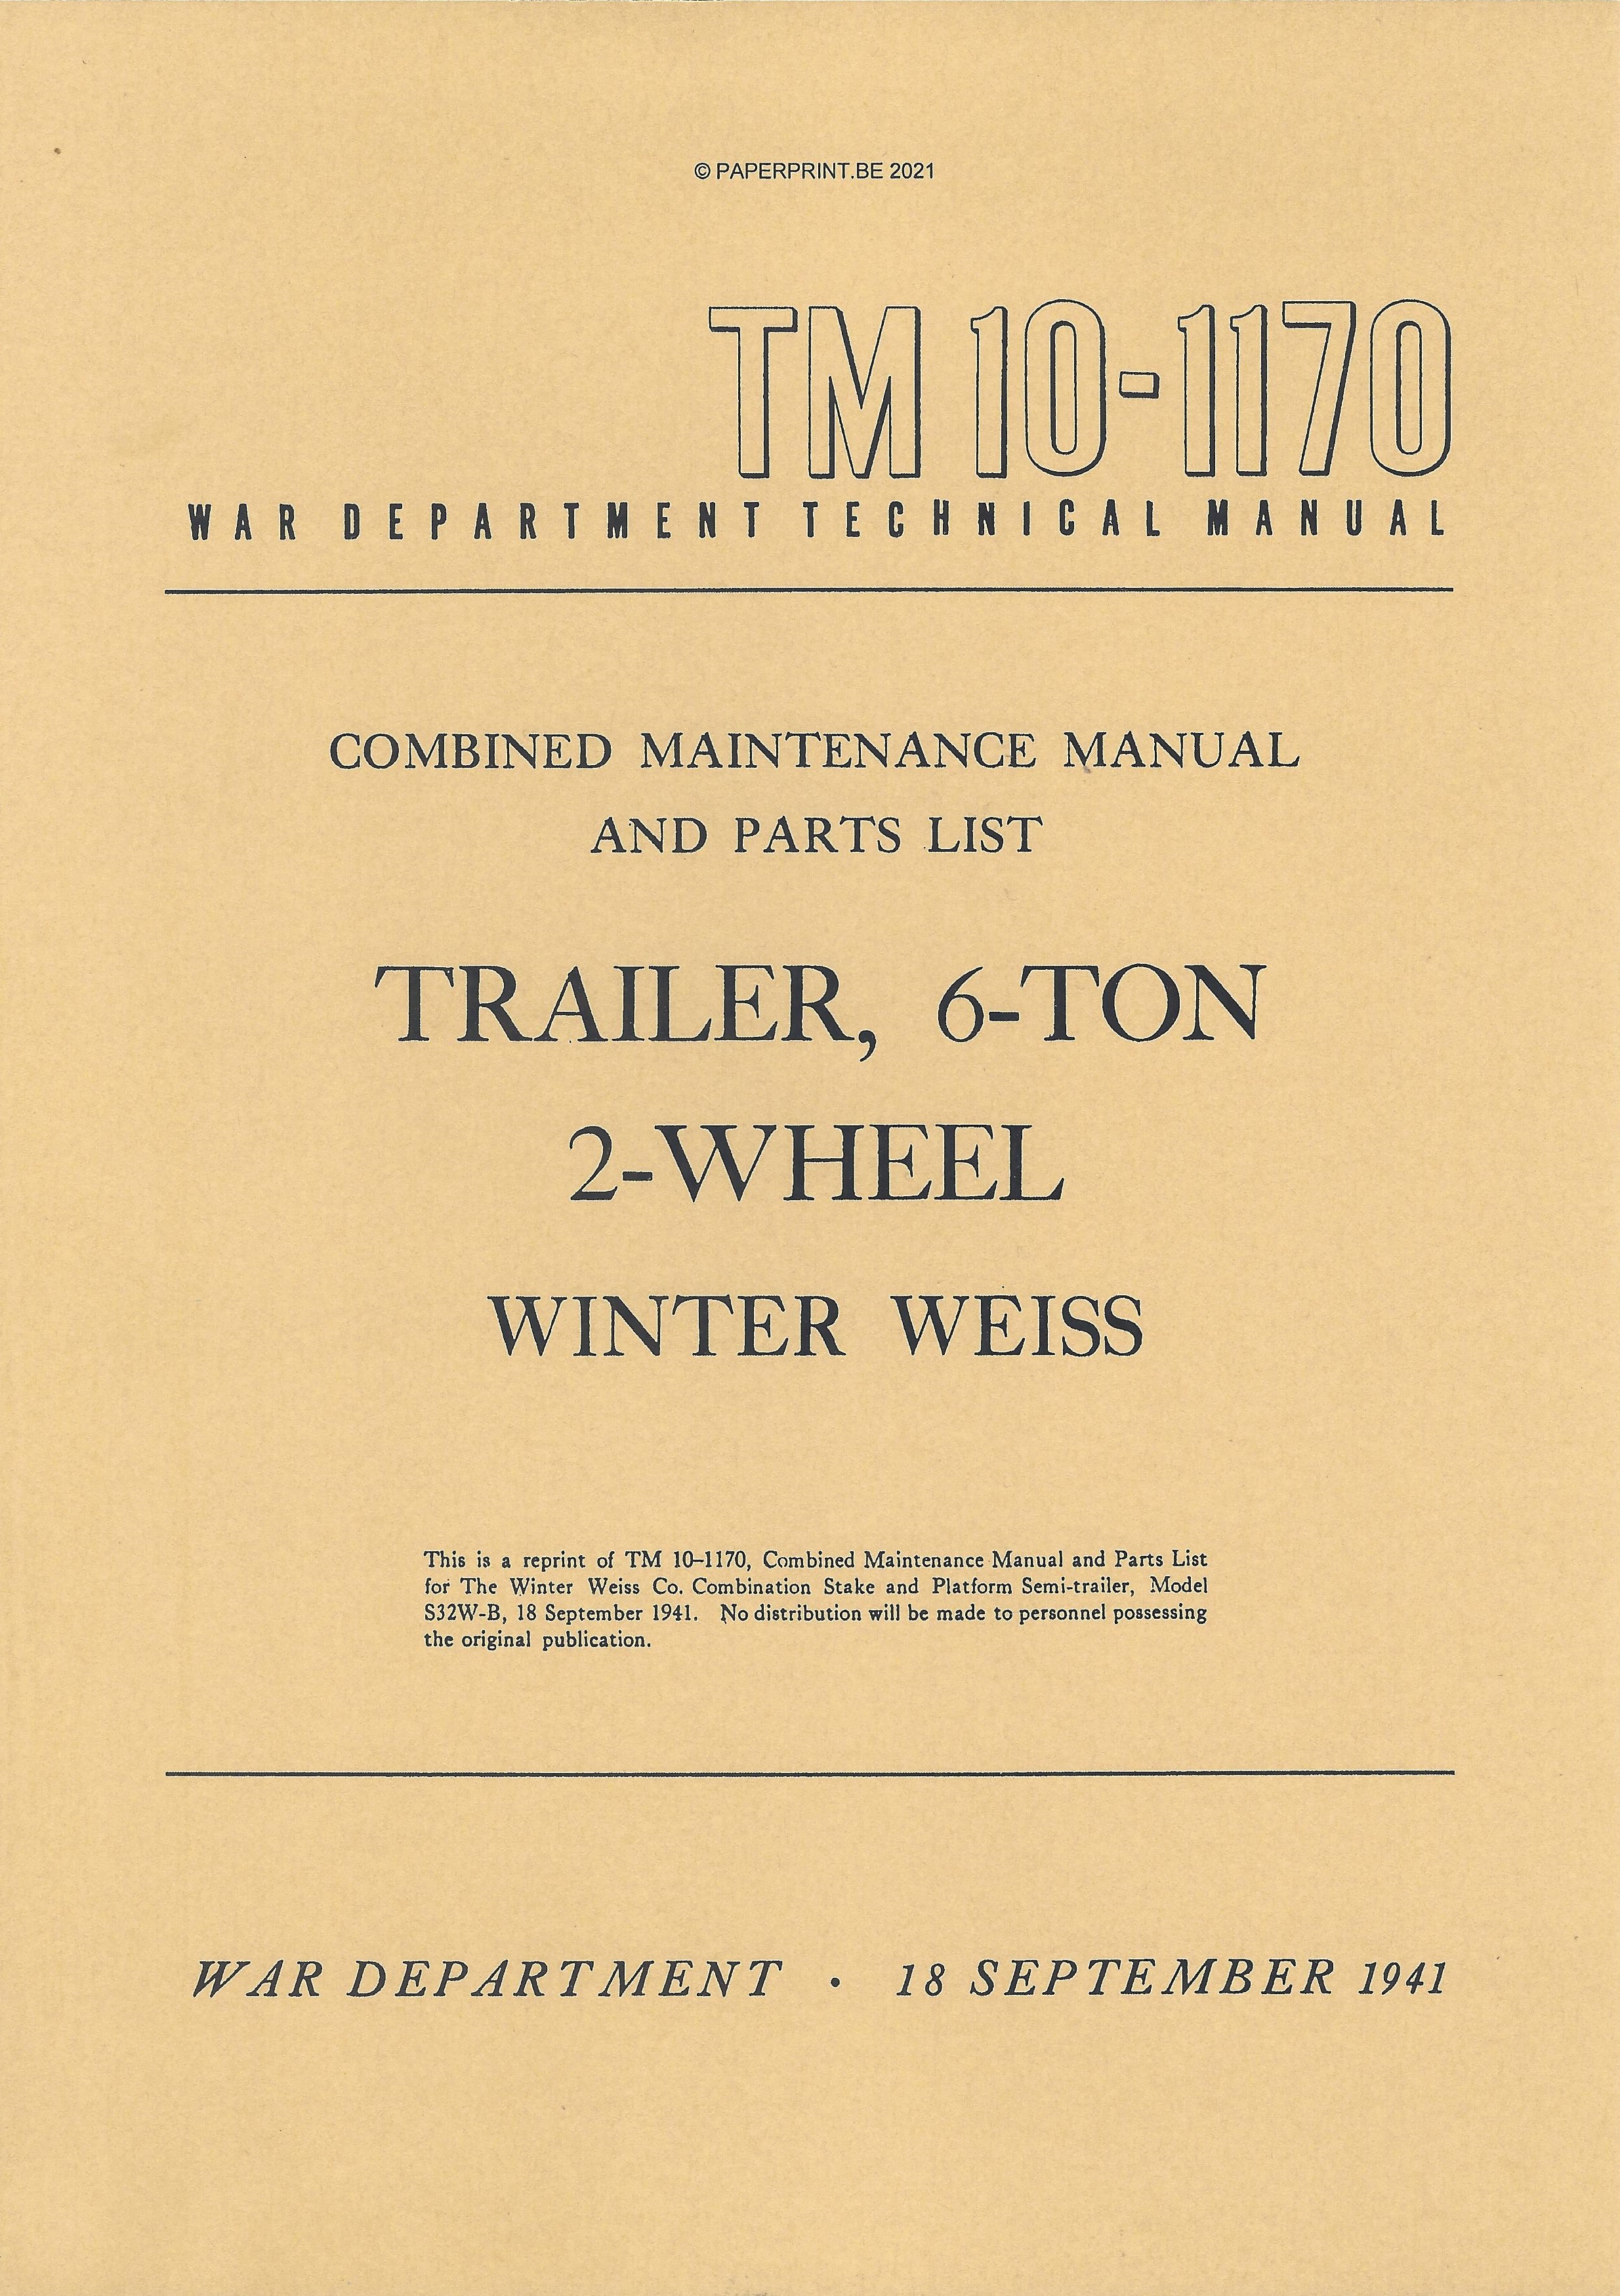 TM 10-1170 US COMBINED MAINTENNCE MANUAL AND PARTS LIST FOR TRAILER, 6-TON 2-WHEEL WINTER WEISS